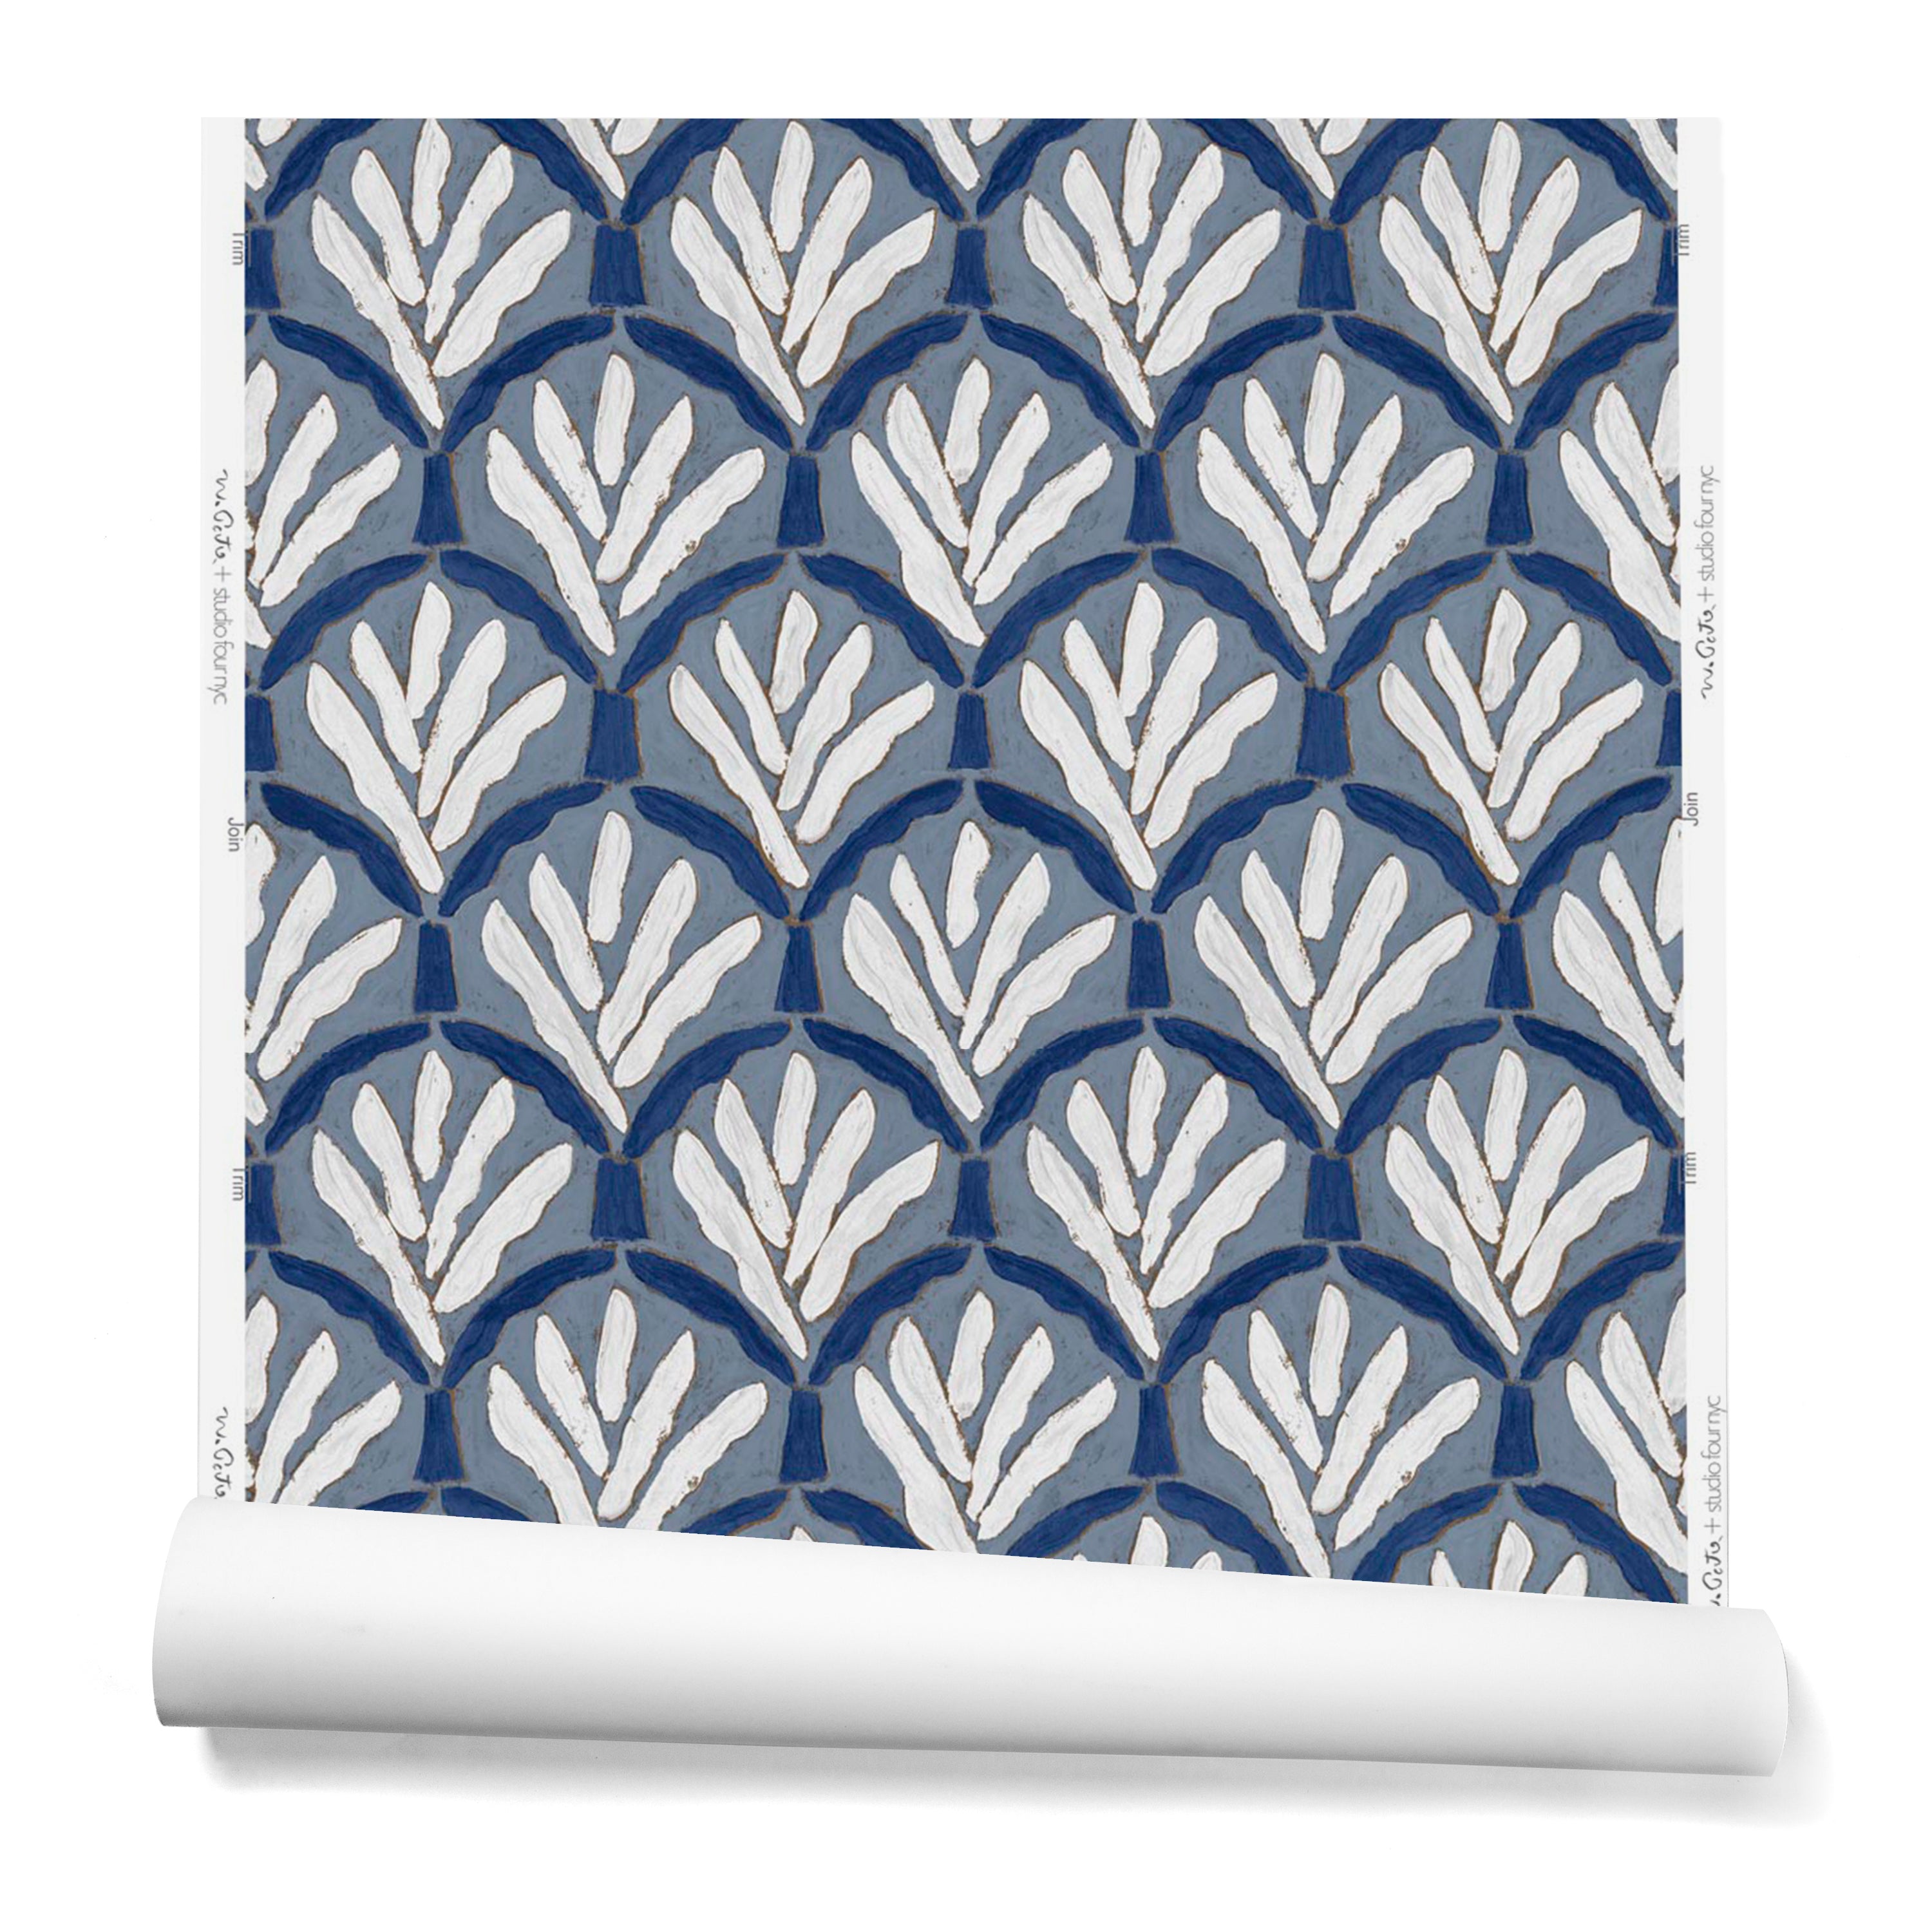 A hanging roll of wallpaper with a repeating Moroccan-inspired scallop pattern in navy and white on a blue background.